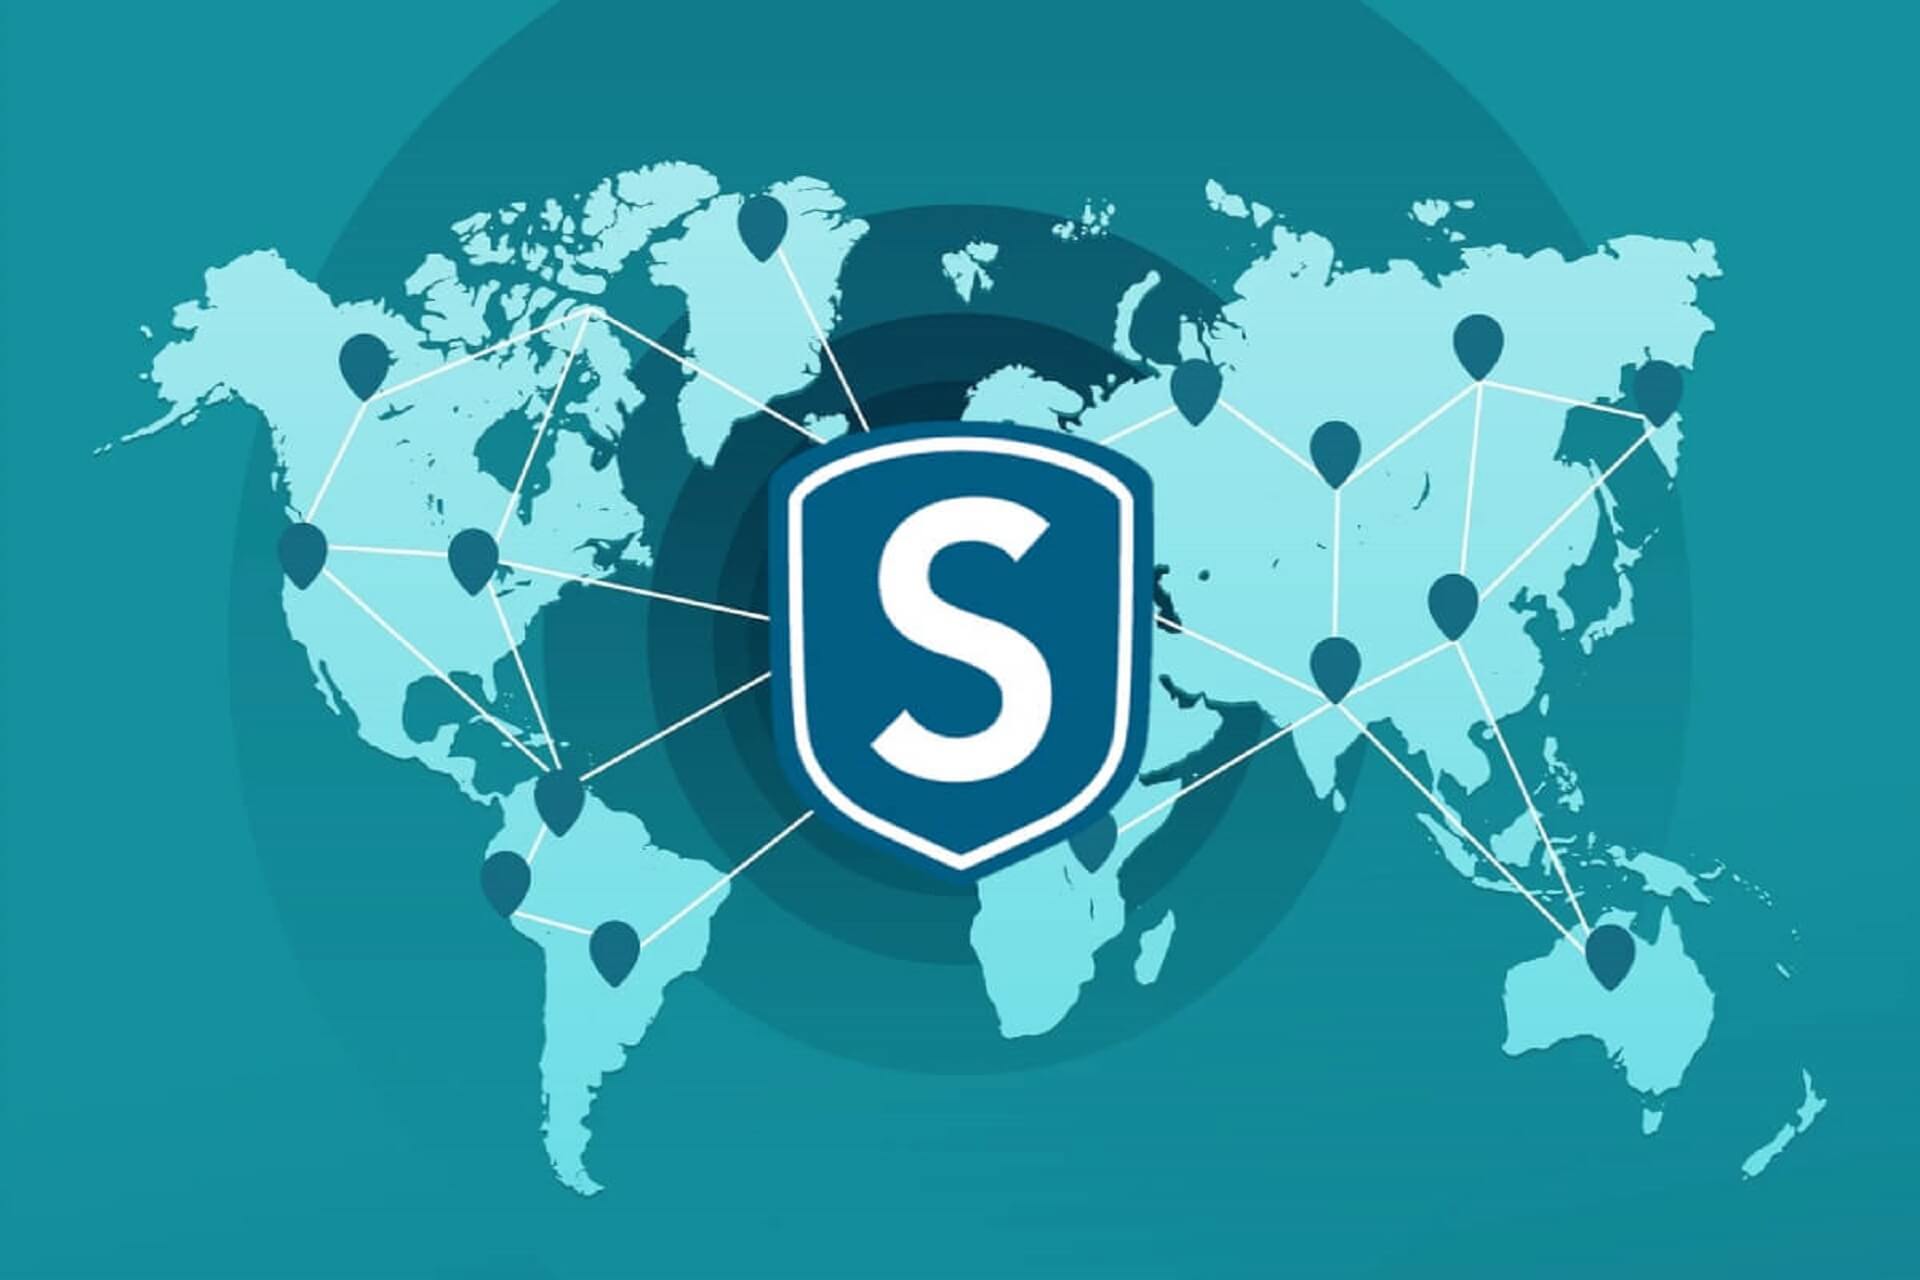 syn flood protection sonicwall global vpn